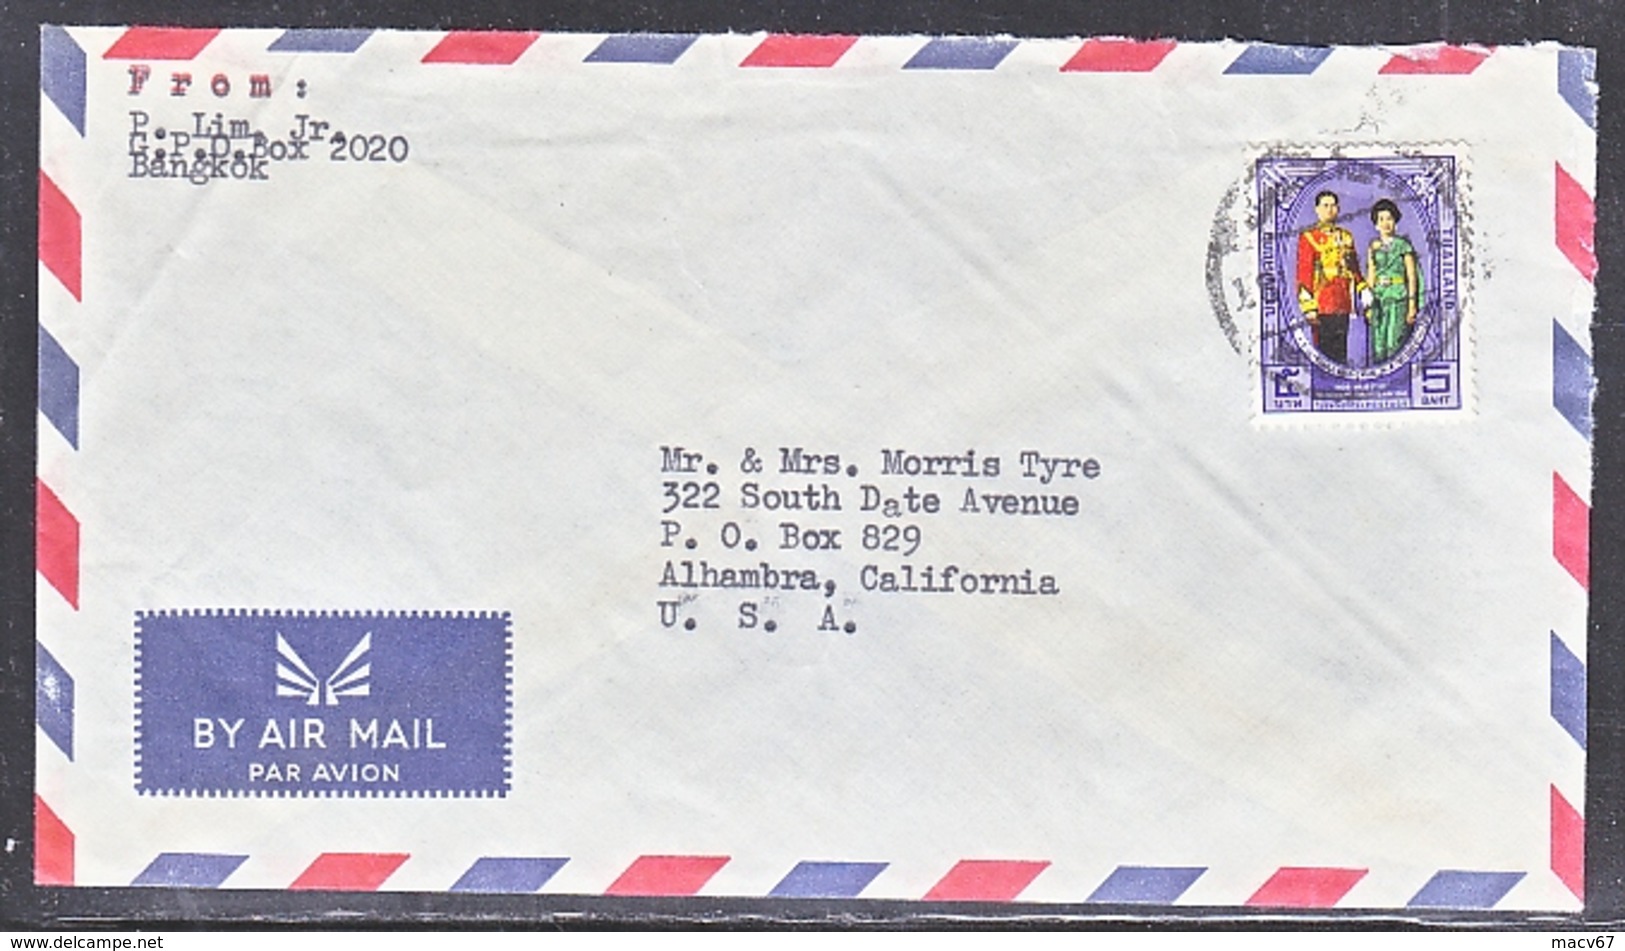 THAILAND  COVER  TO  U.S.A.  SINGLE  FRANKING - Thailand